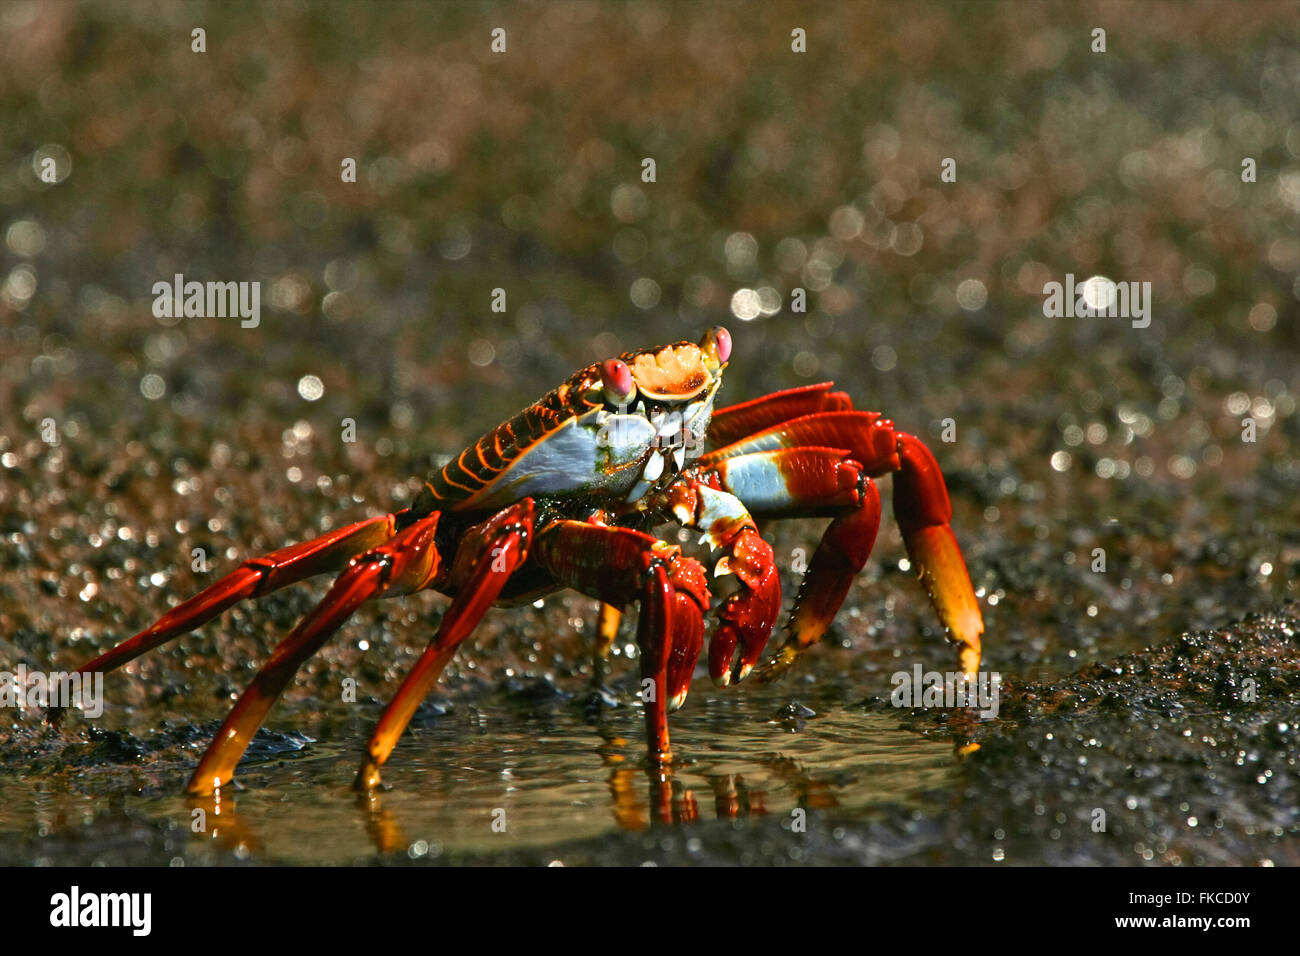 A close-up of a Sally Lightfoot crab on the Galapagos Islands Stock Photo